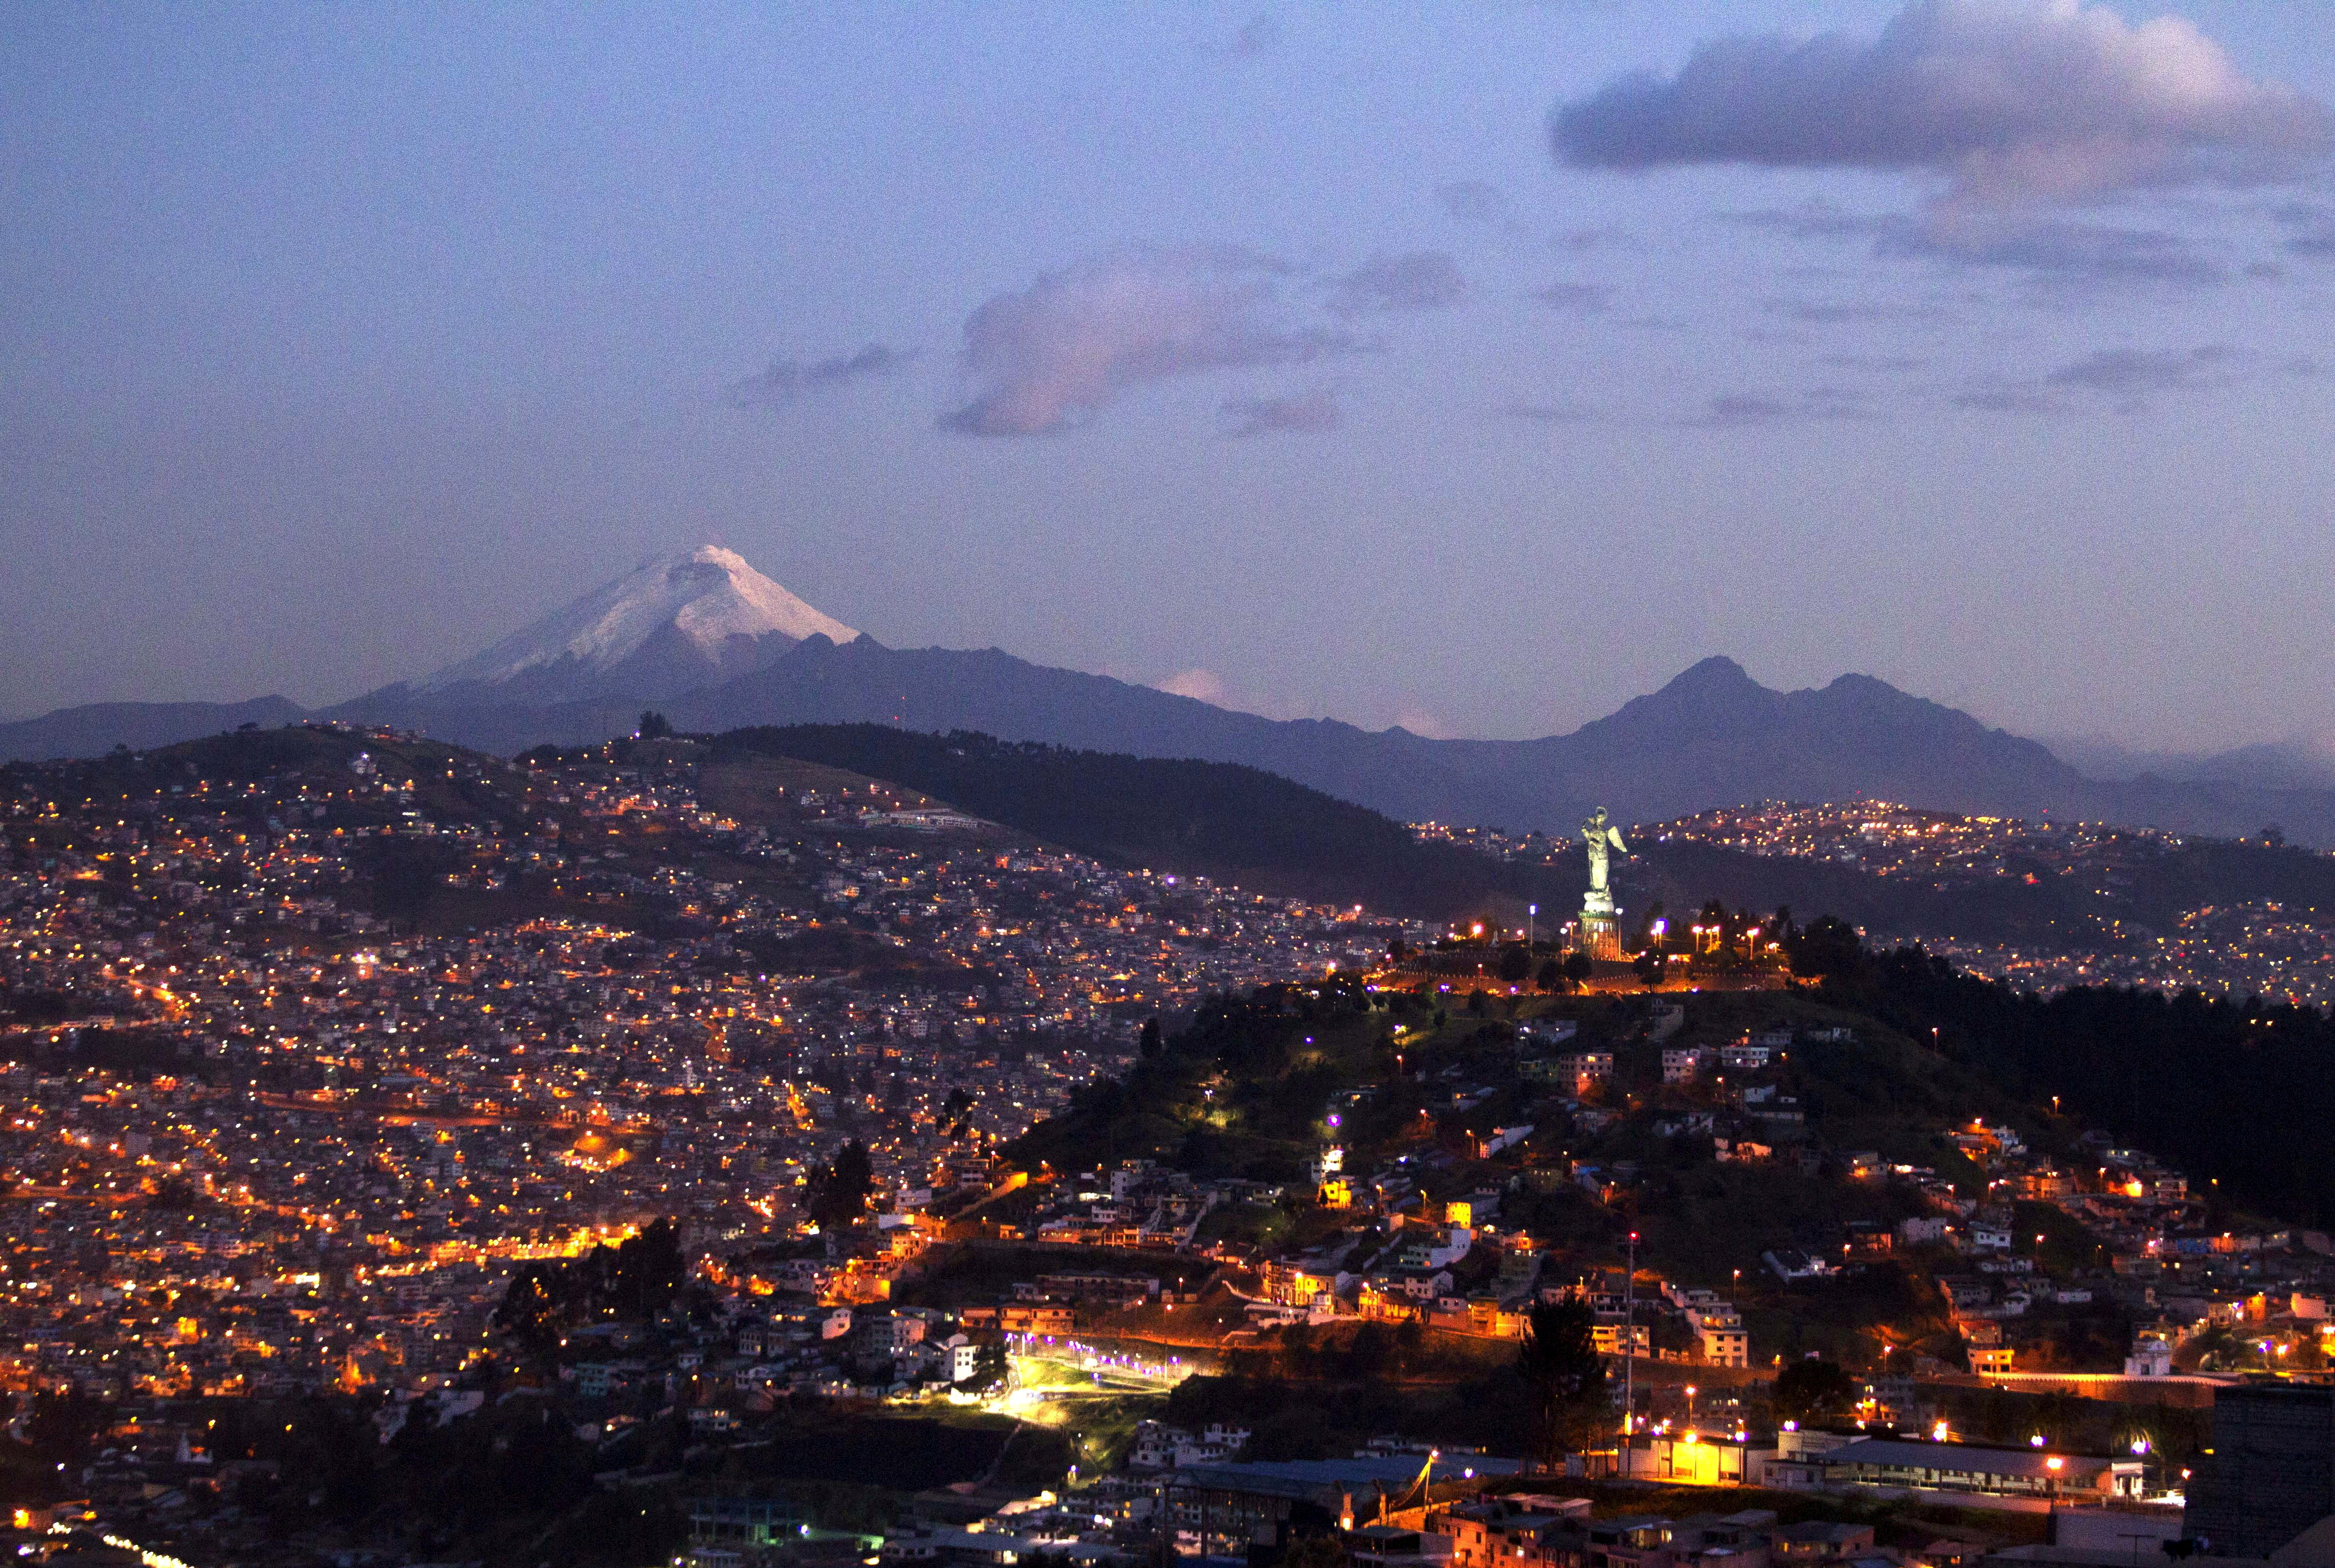 Ecuador's capital city, Quito, is pictured with the Cotopaxi volcano in background